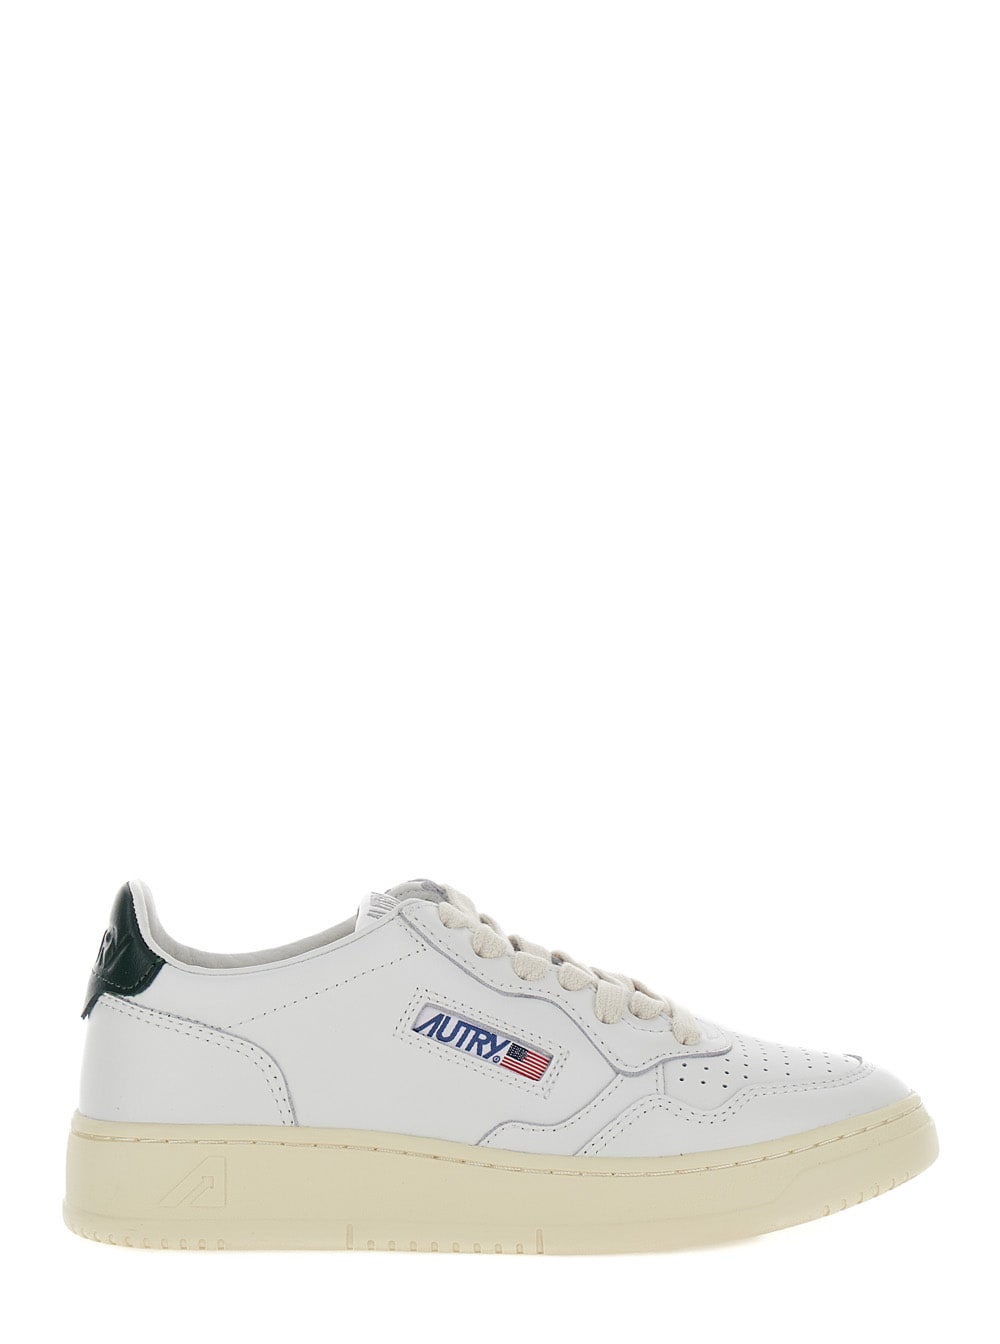 medalist White Low Top Sneakers With Contrasting Heel Tab In Leather Woman